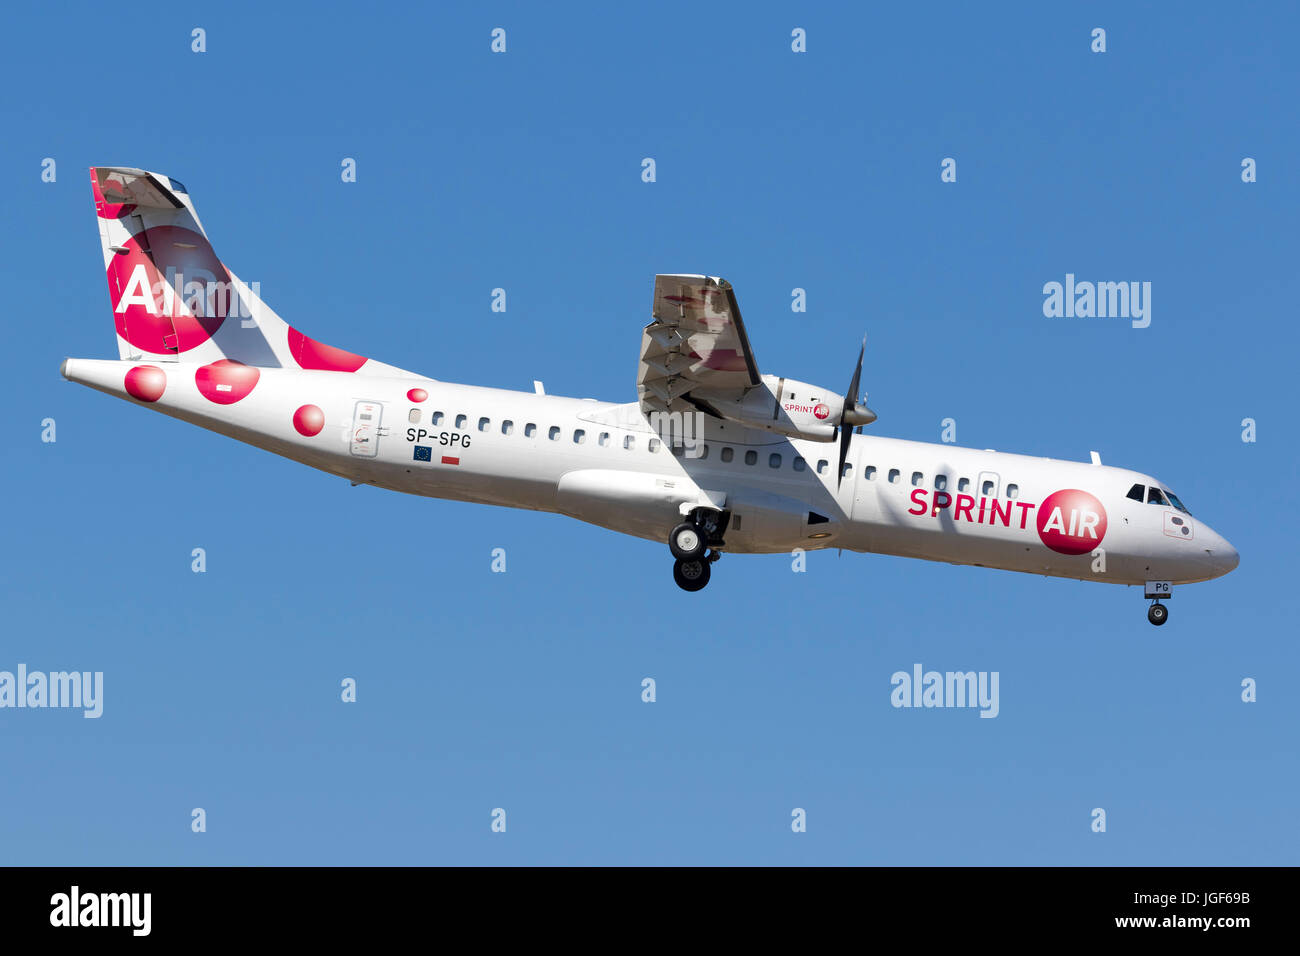 Luqa, Malta - July 6, 2017: SprintAir ATR 72-202 [SP-SPG] arriving on a cargo flight from Cologne Bonn Airport. Stock Photo